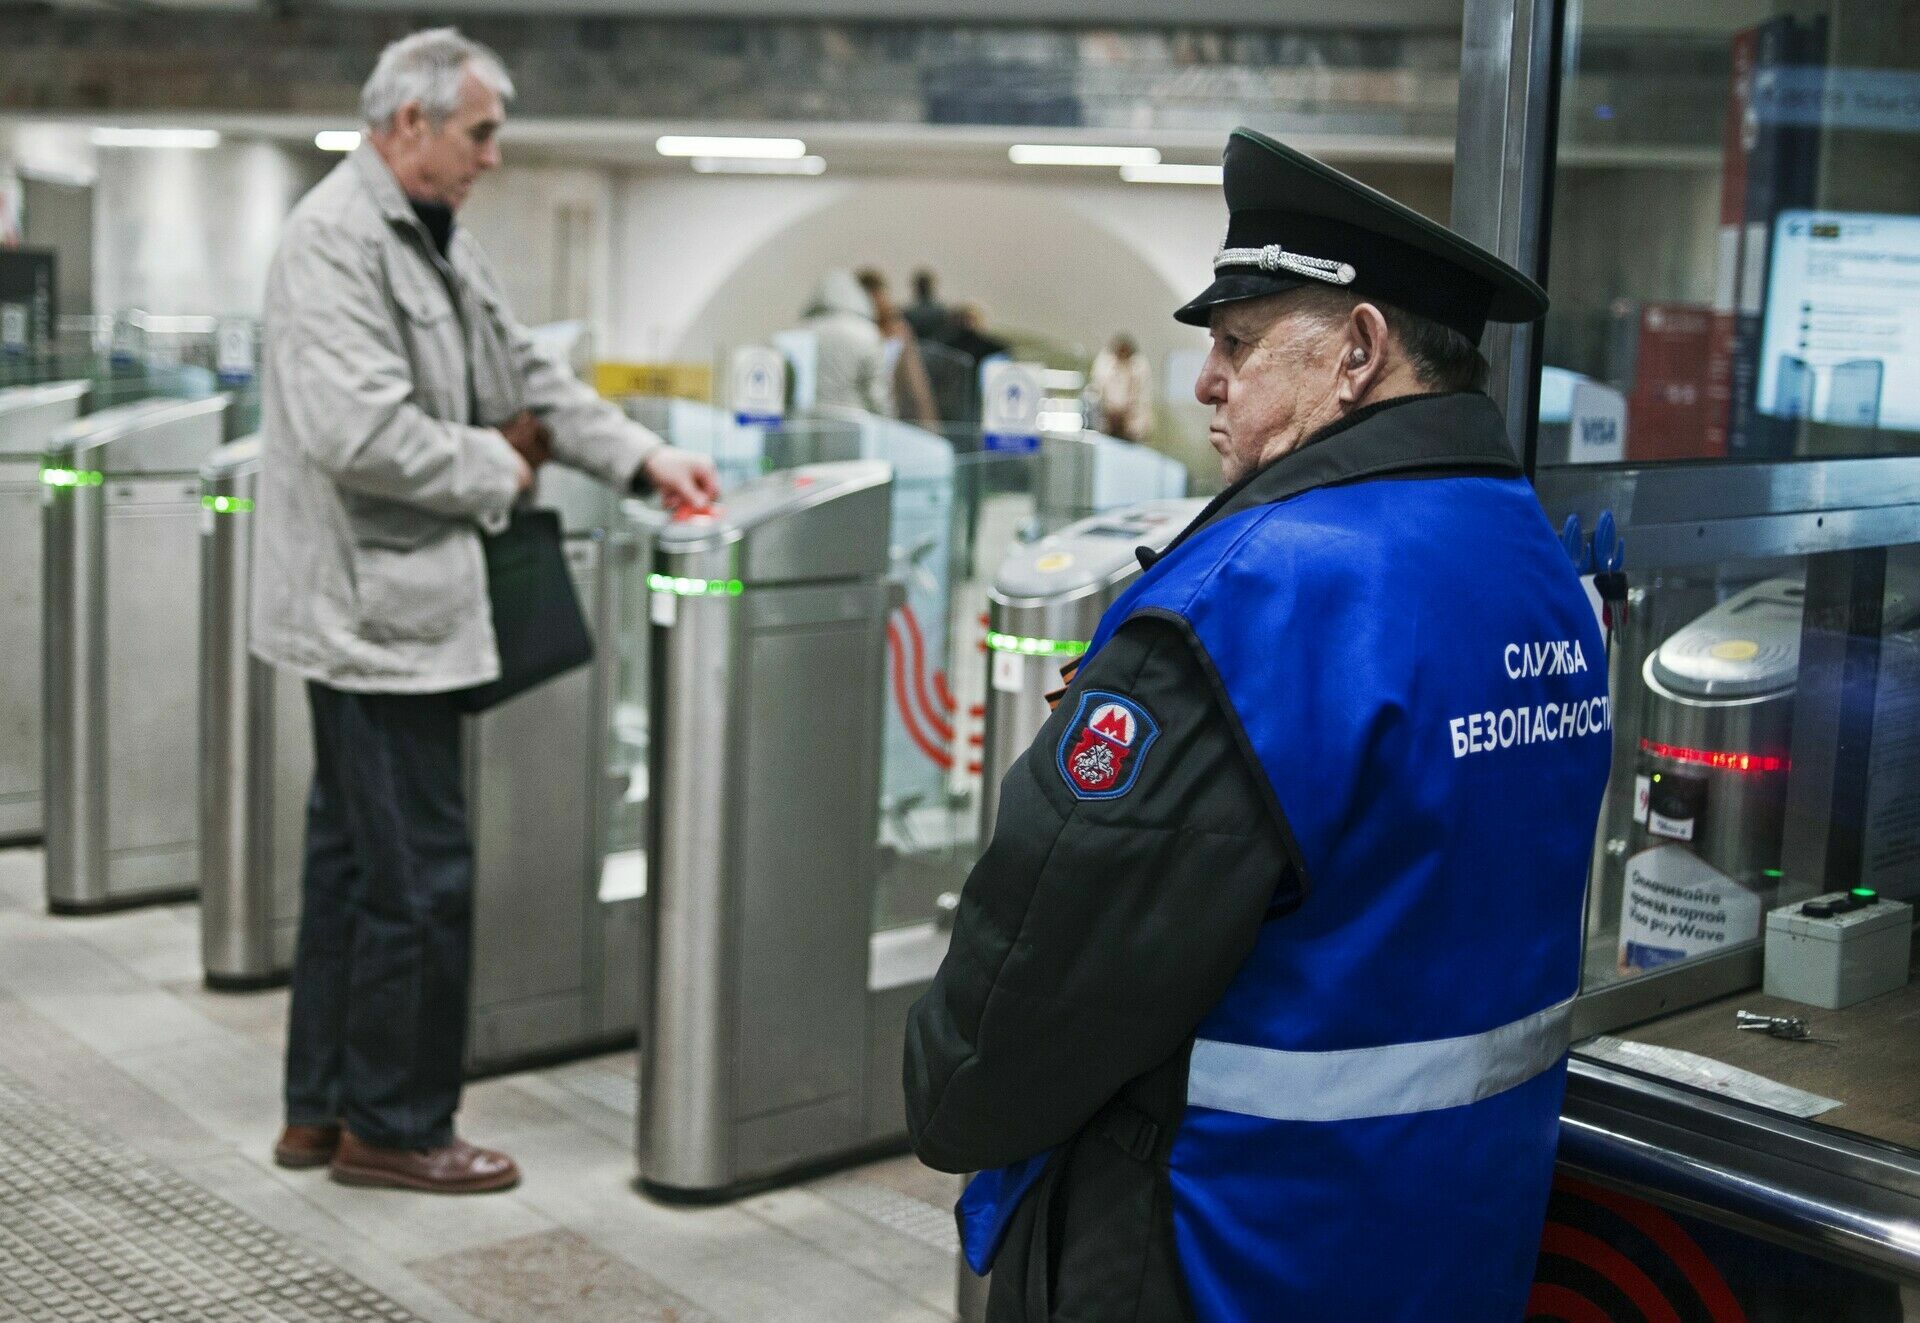 Moscow metro does not employ without vaccination against covid